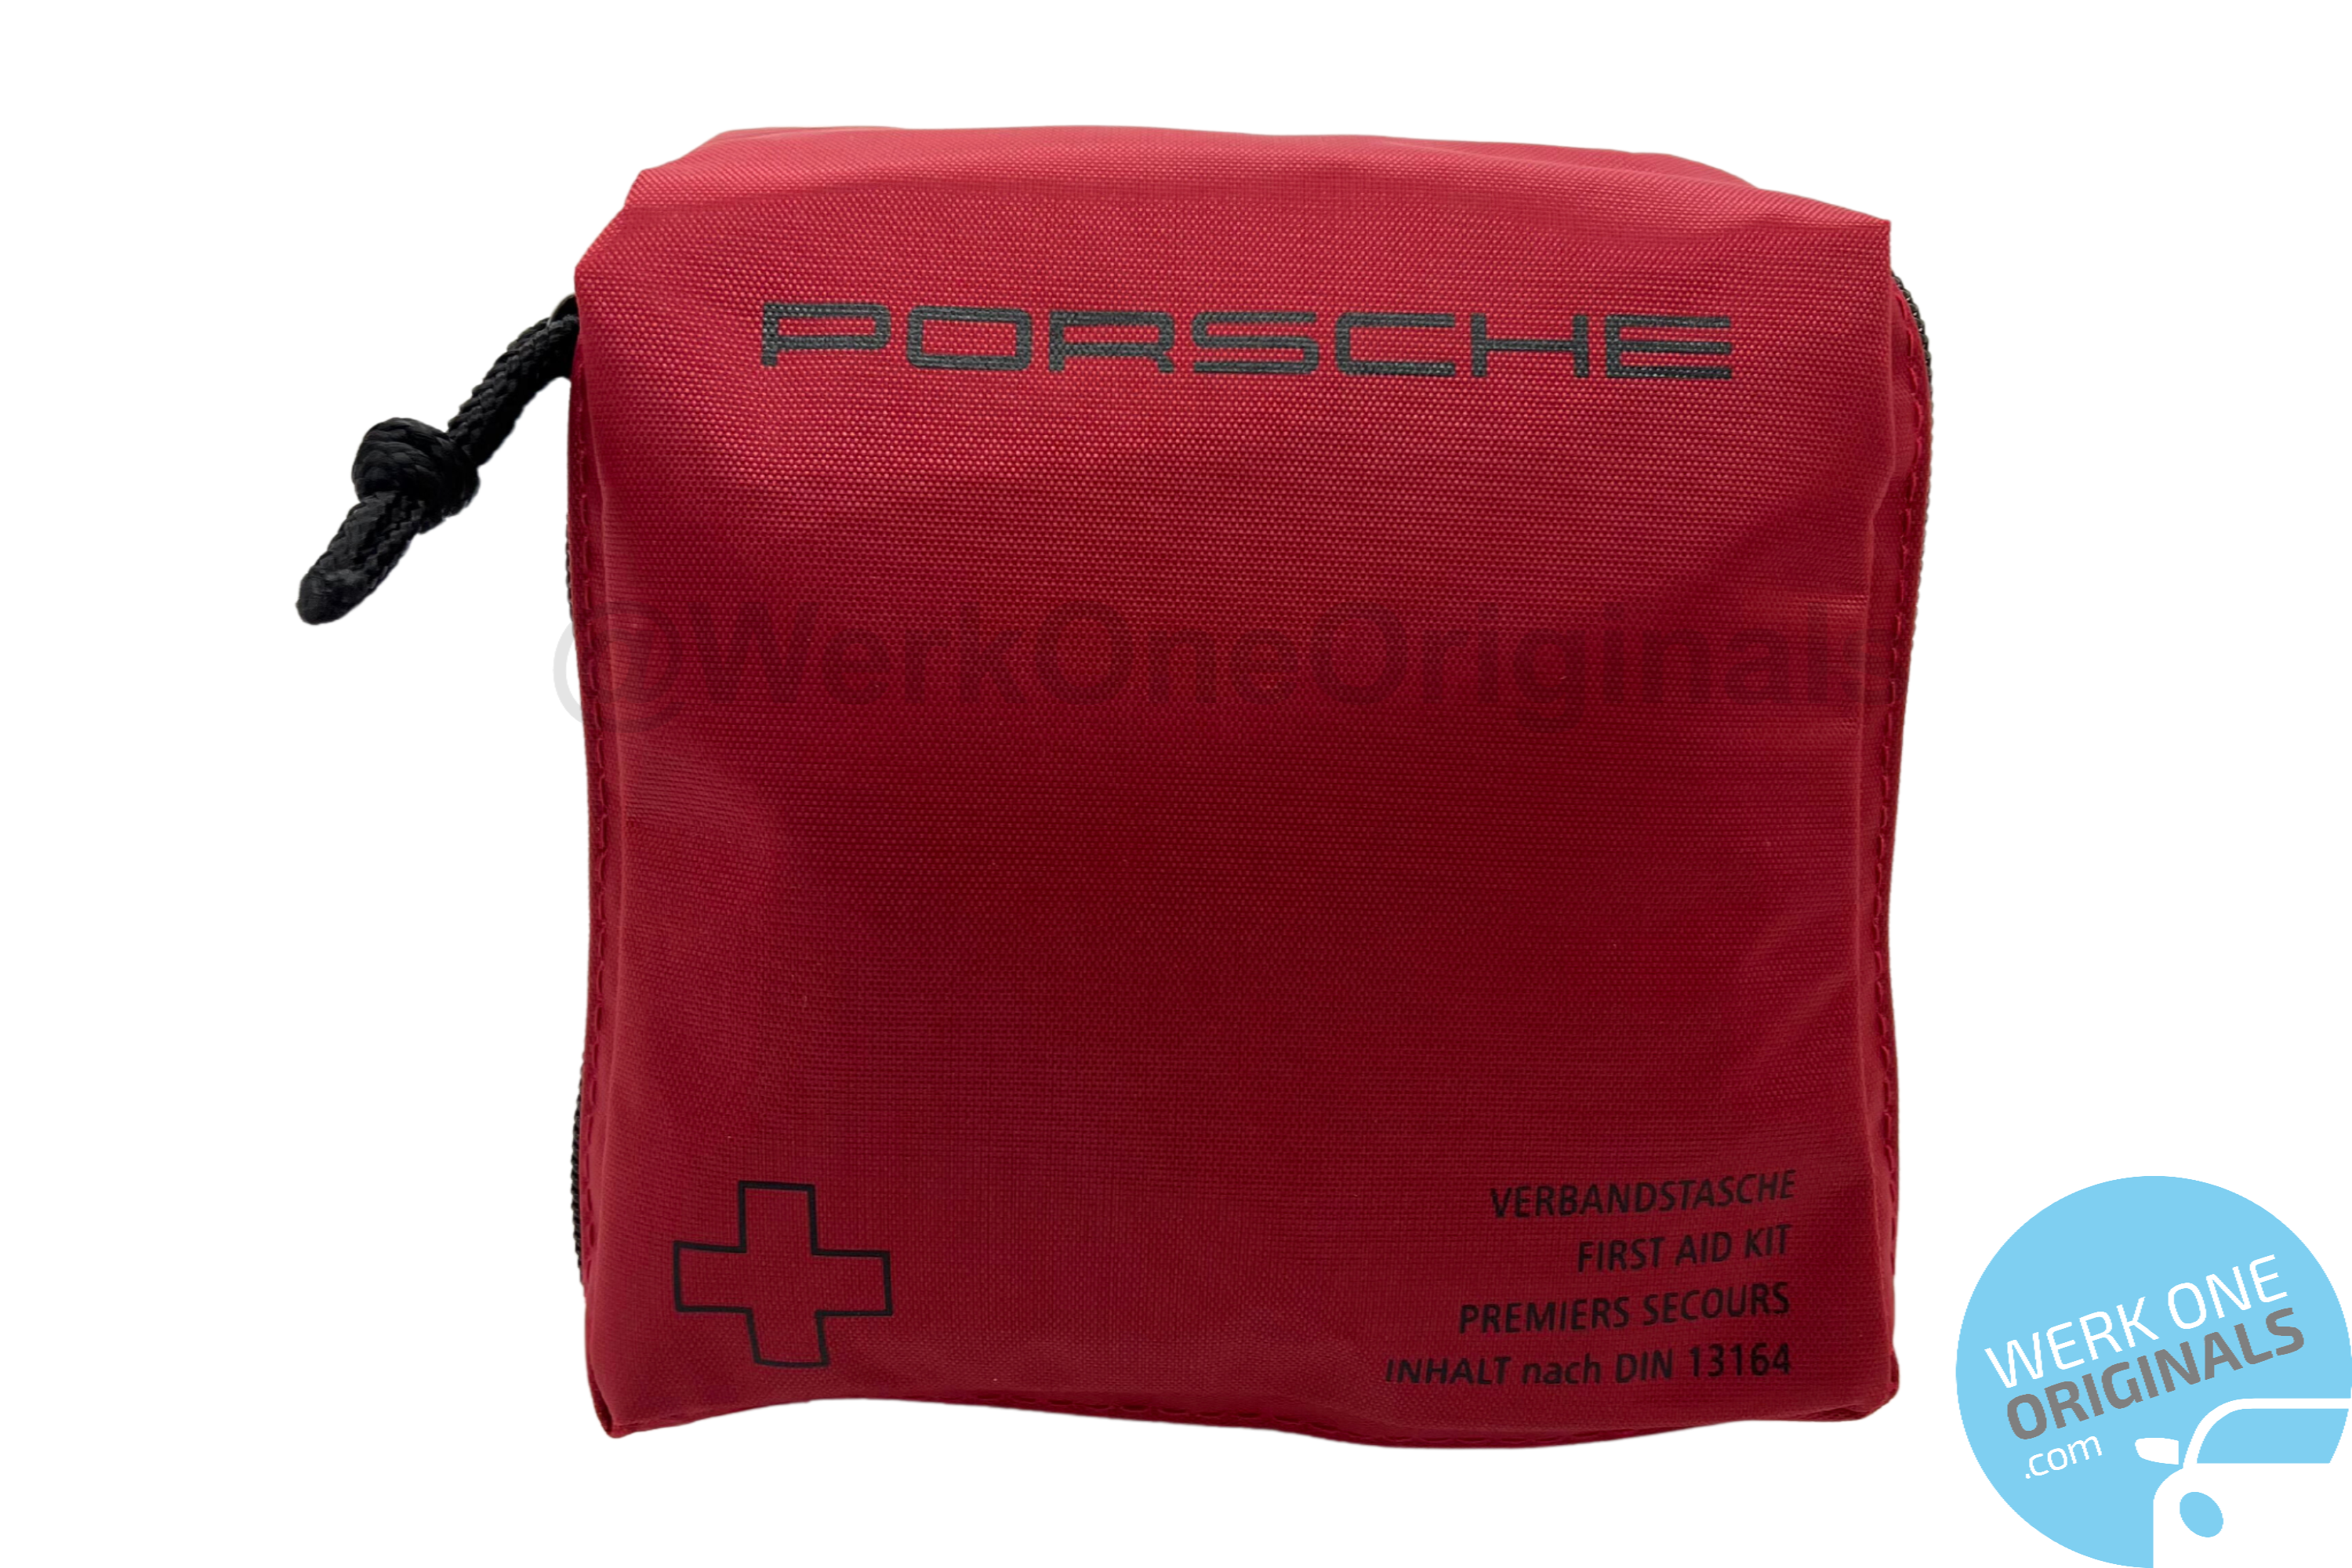 Official Porsche First Aid Kit - Portable First Aid Kit